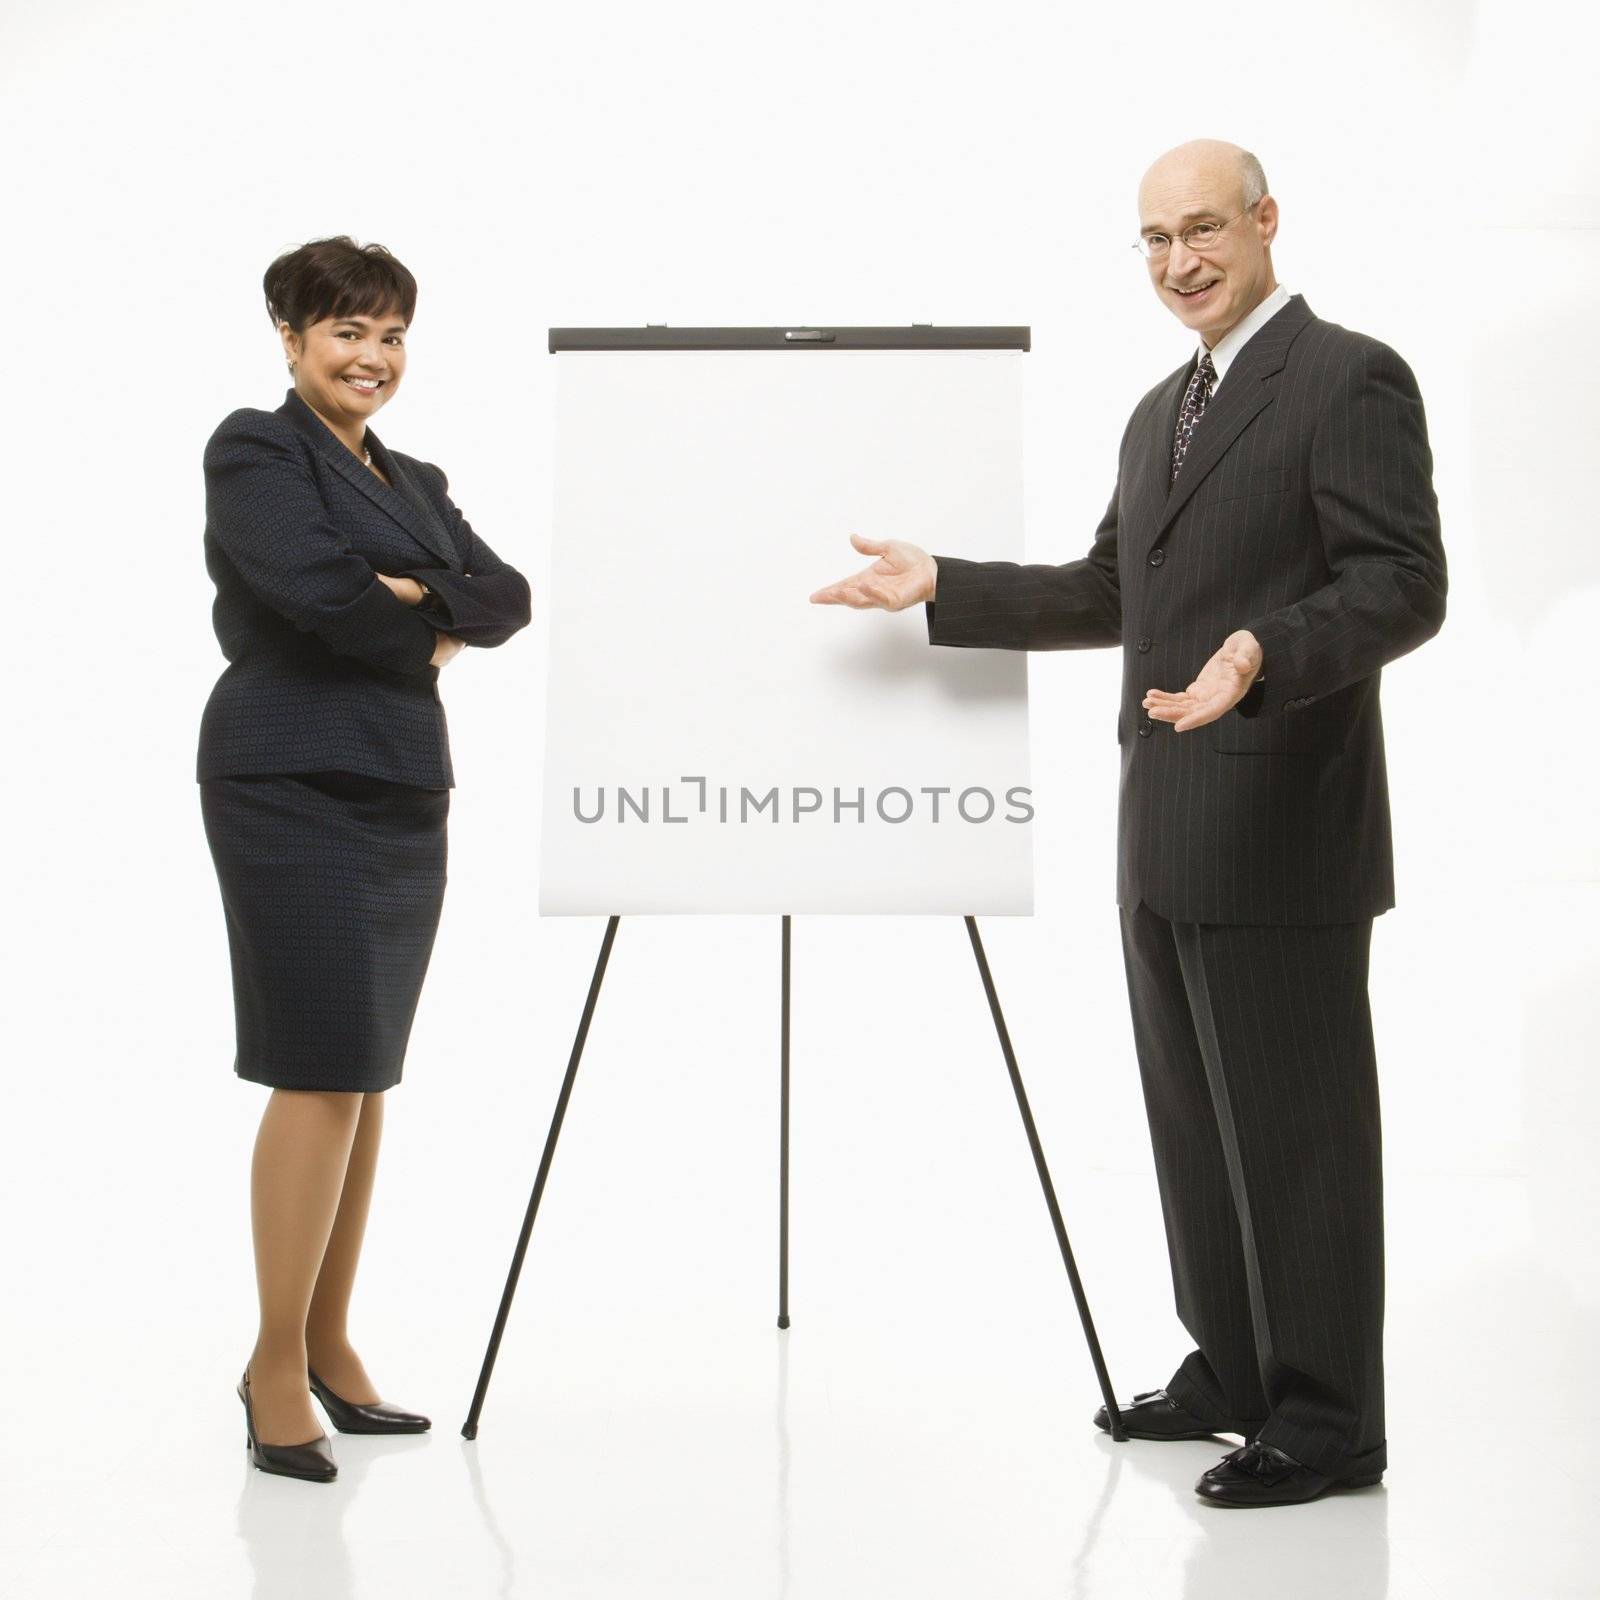 Smiling Caucasian middle-aged businessman and Filipino businesswoman standing making presentation against white background.